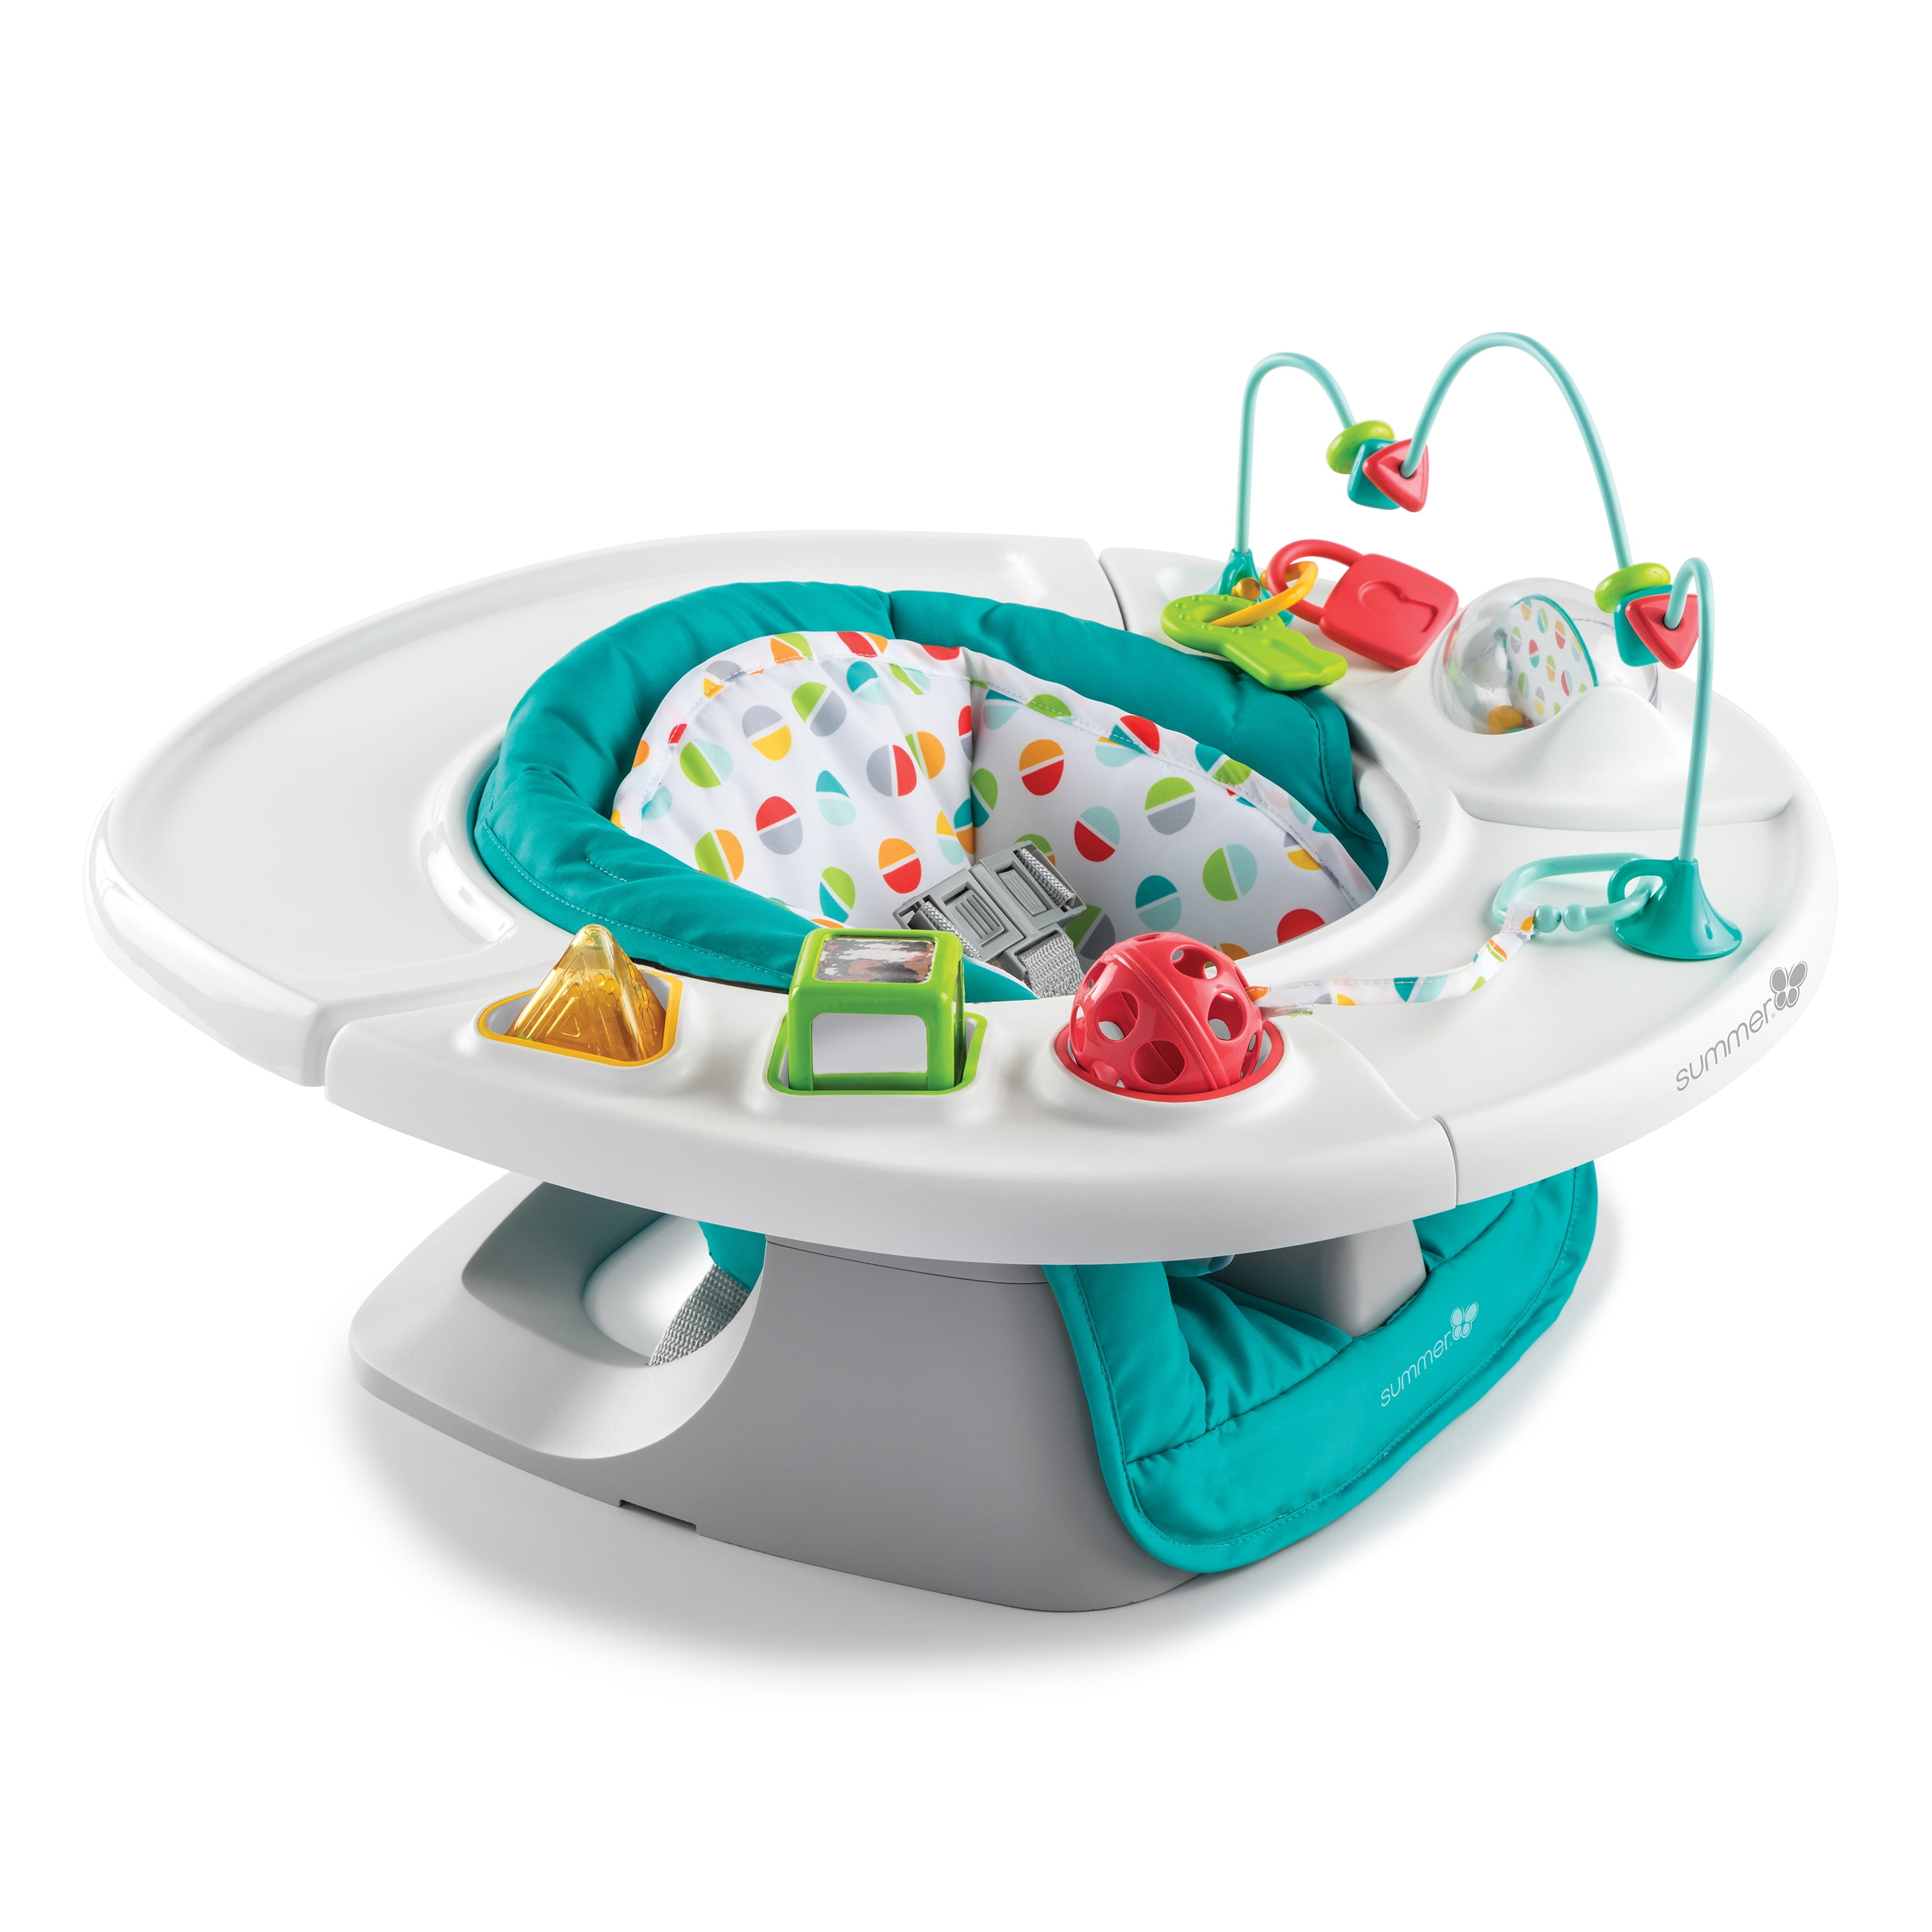 Summer 4-in-1 SuperSeat (Teal 